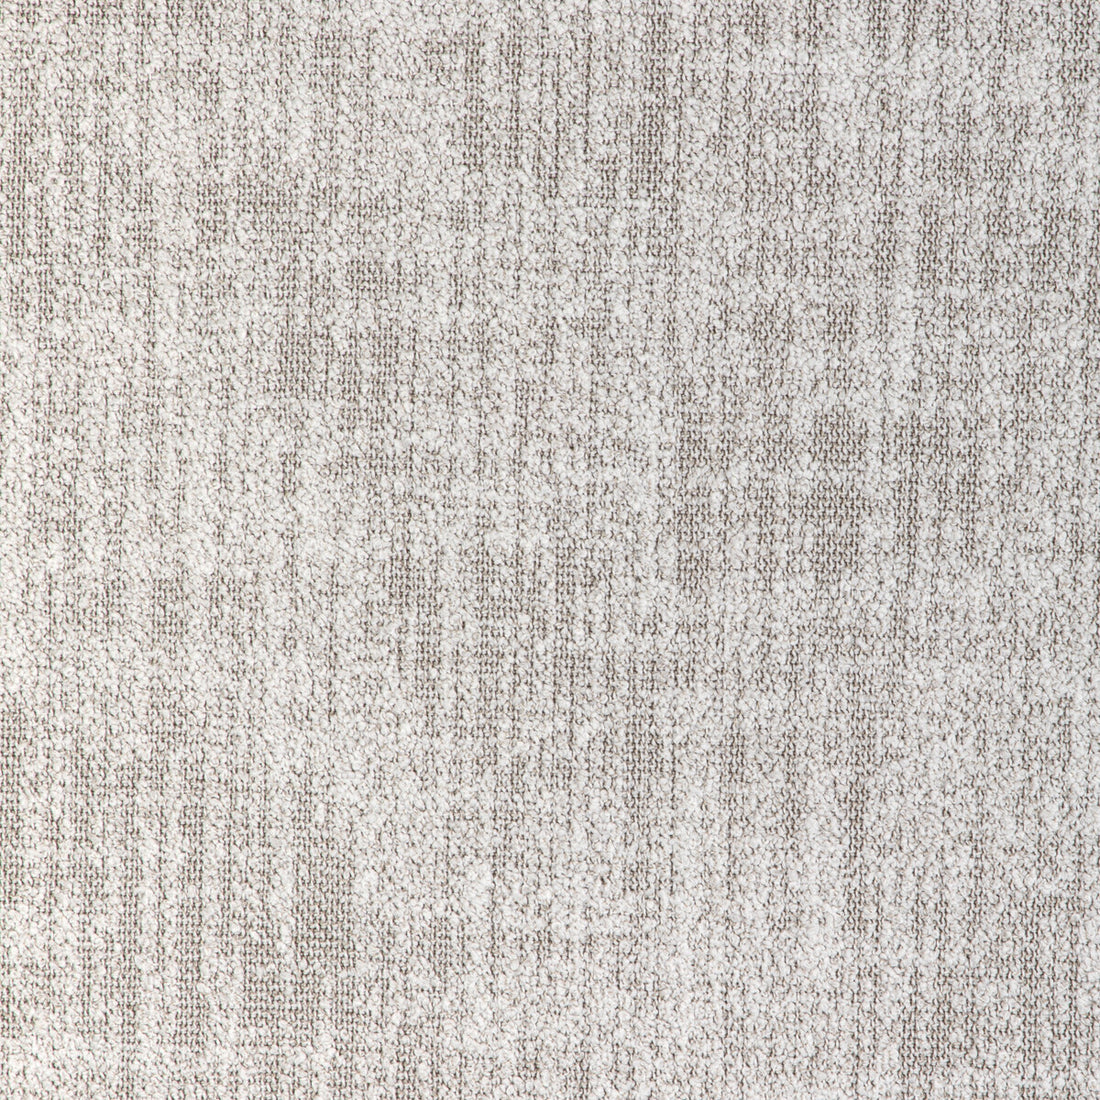 Coastline Weave fabric in driftwood color - pattern 36930.116.0 - by Kravet Couture in the Riviera collection